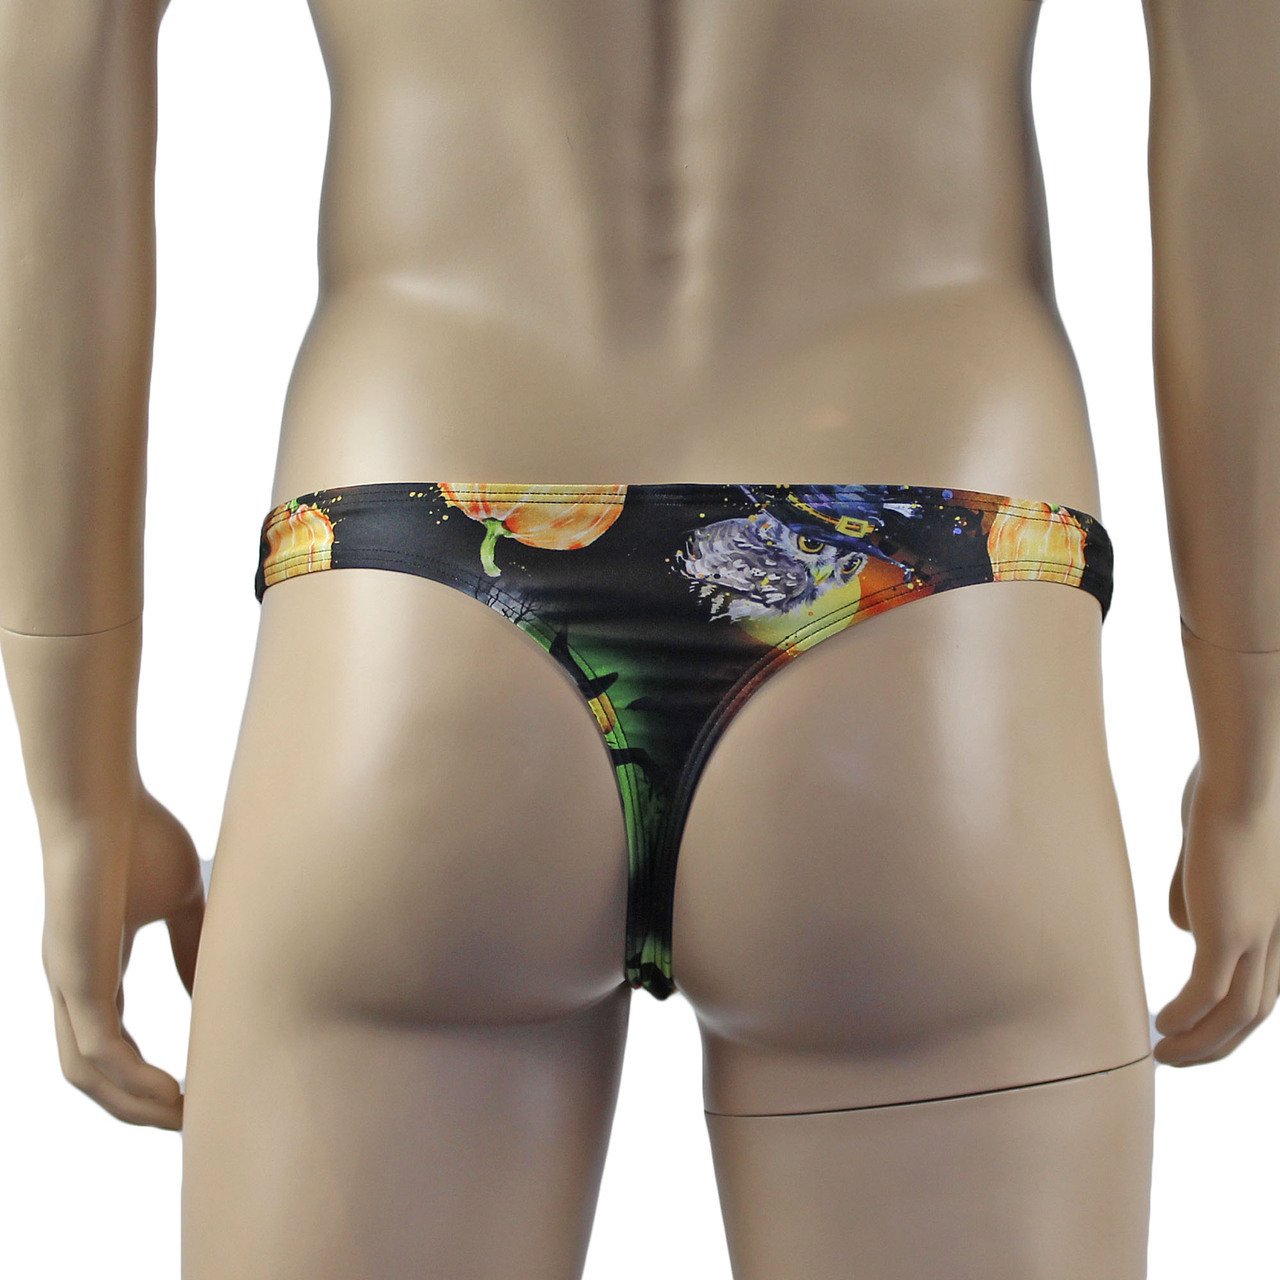 Halloween Mens Witches Pumpkins and Bats Full Front G string Thong